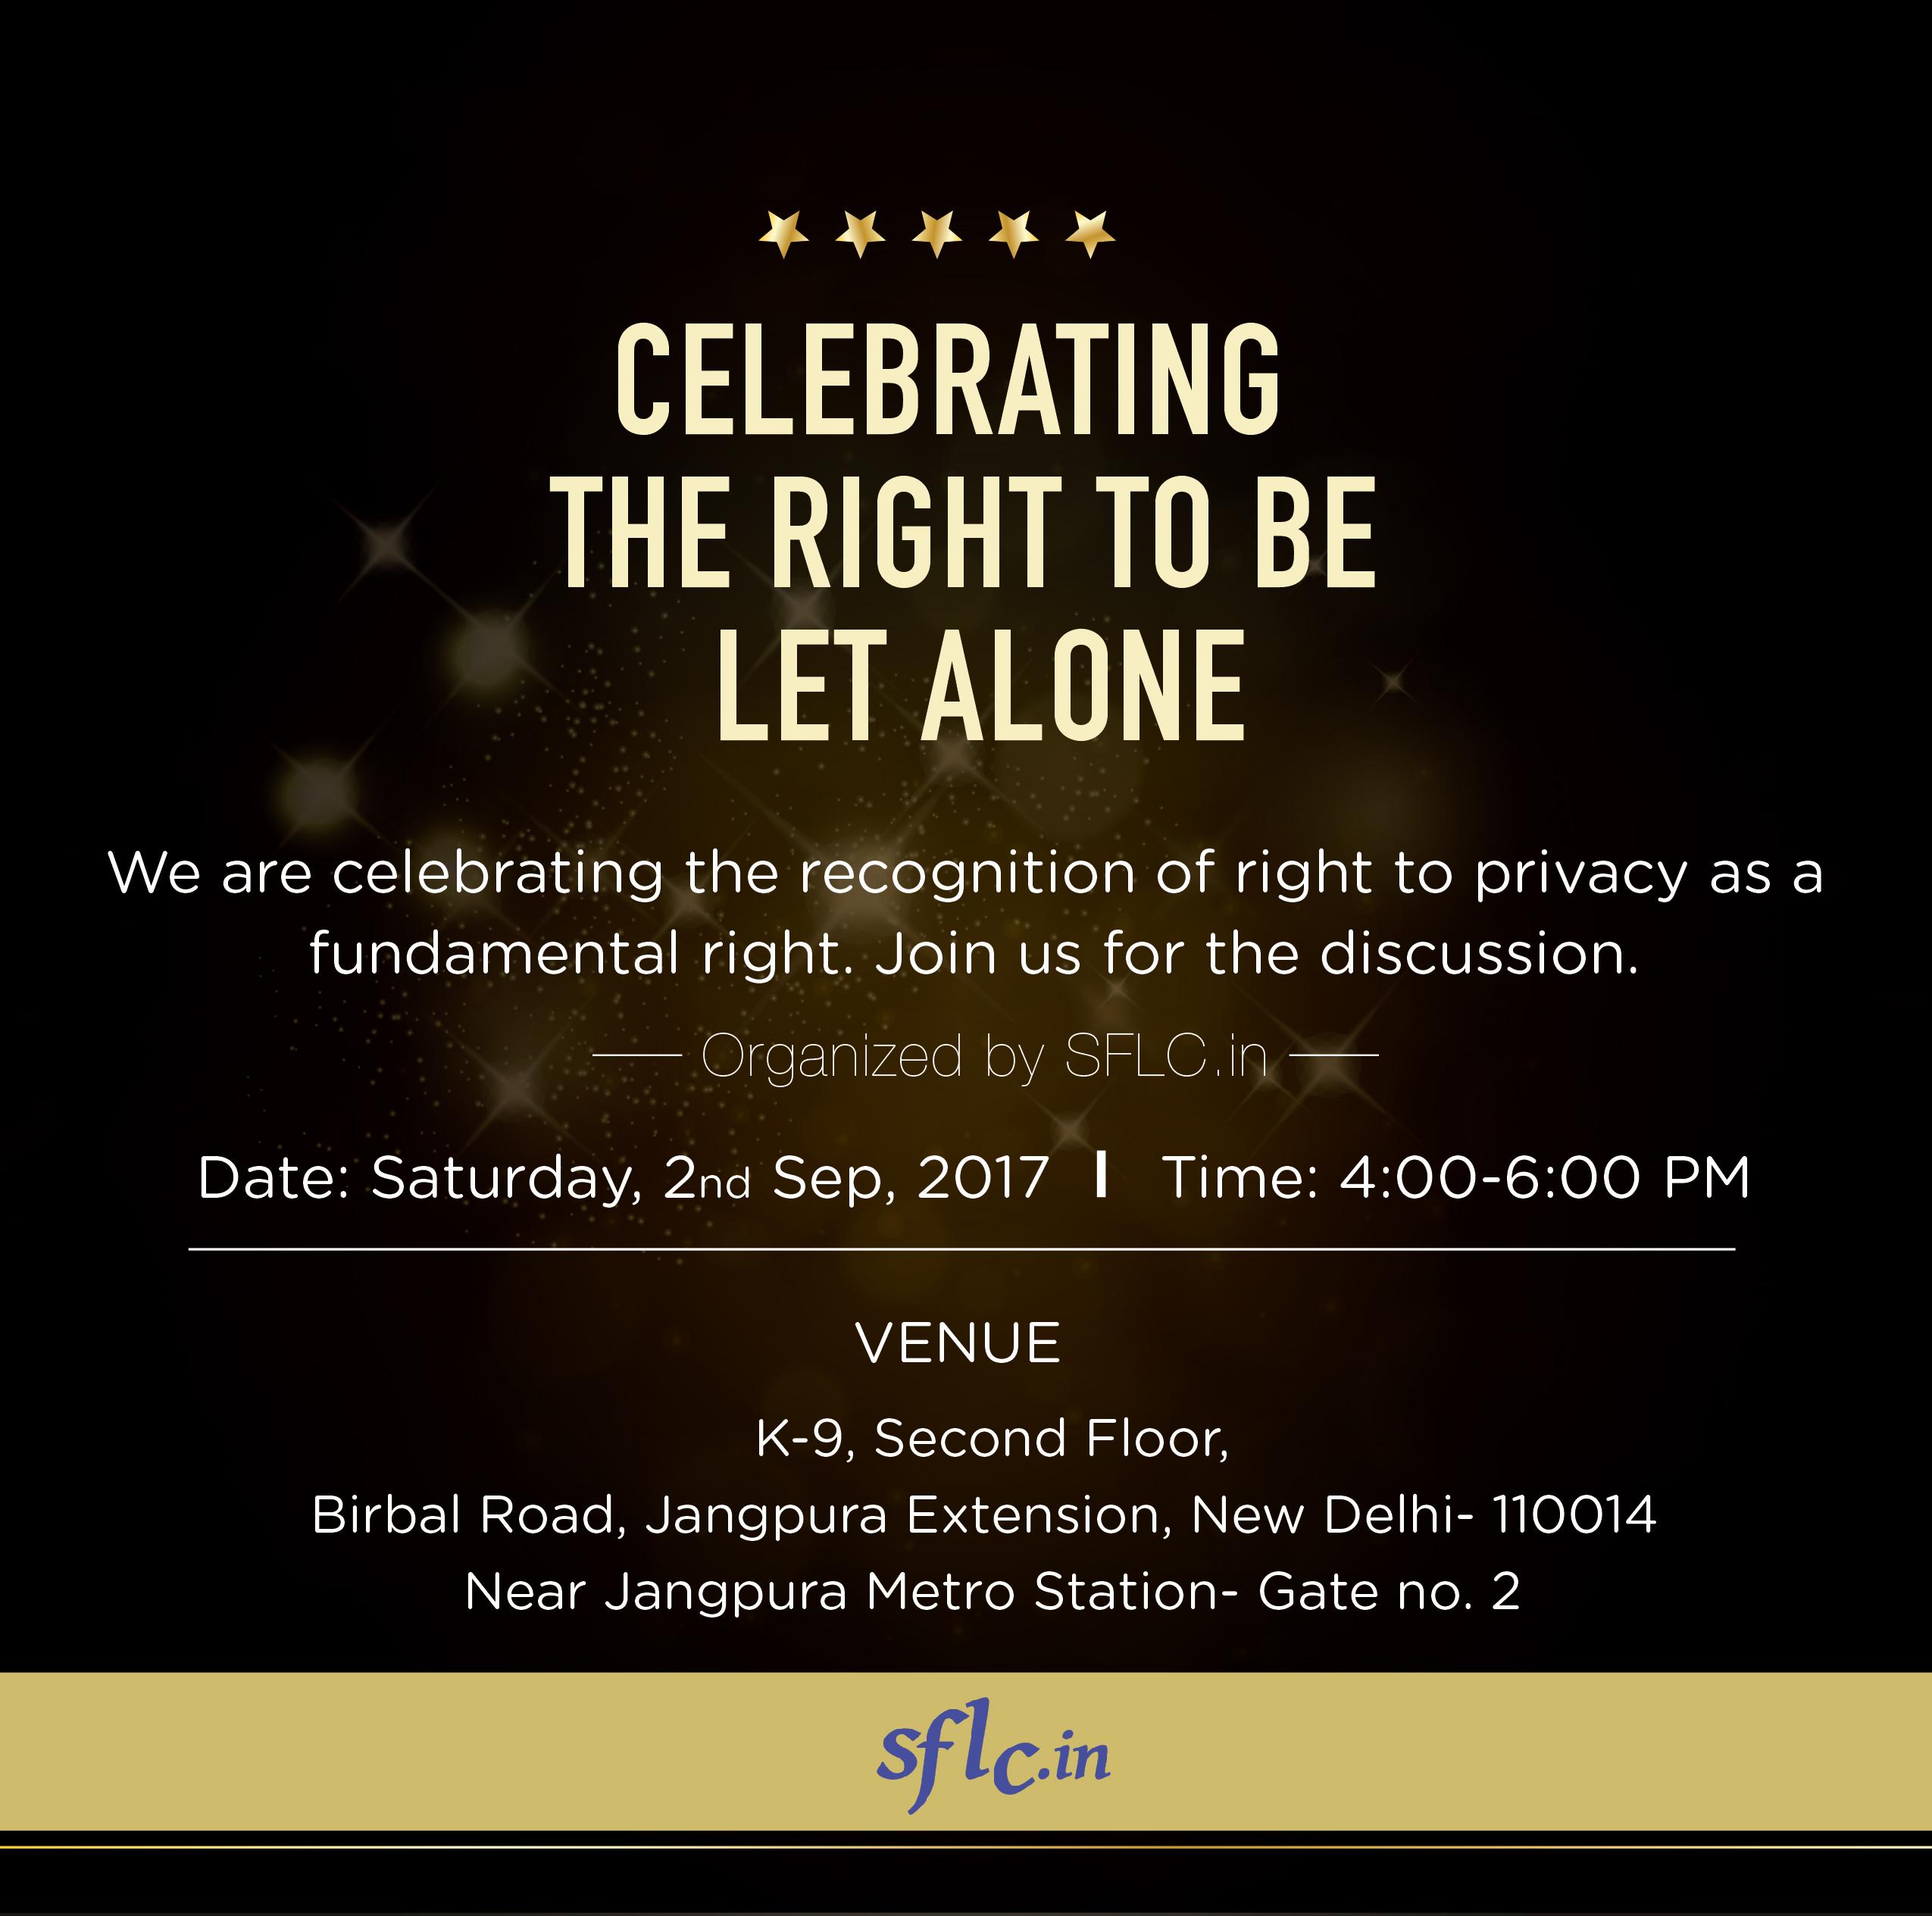 Celebrating the Right to be Let Alone